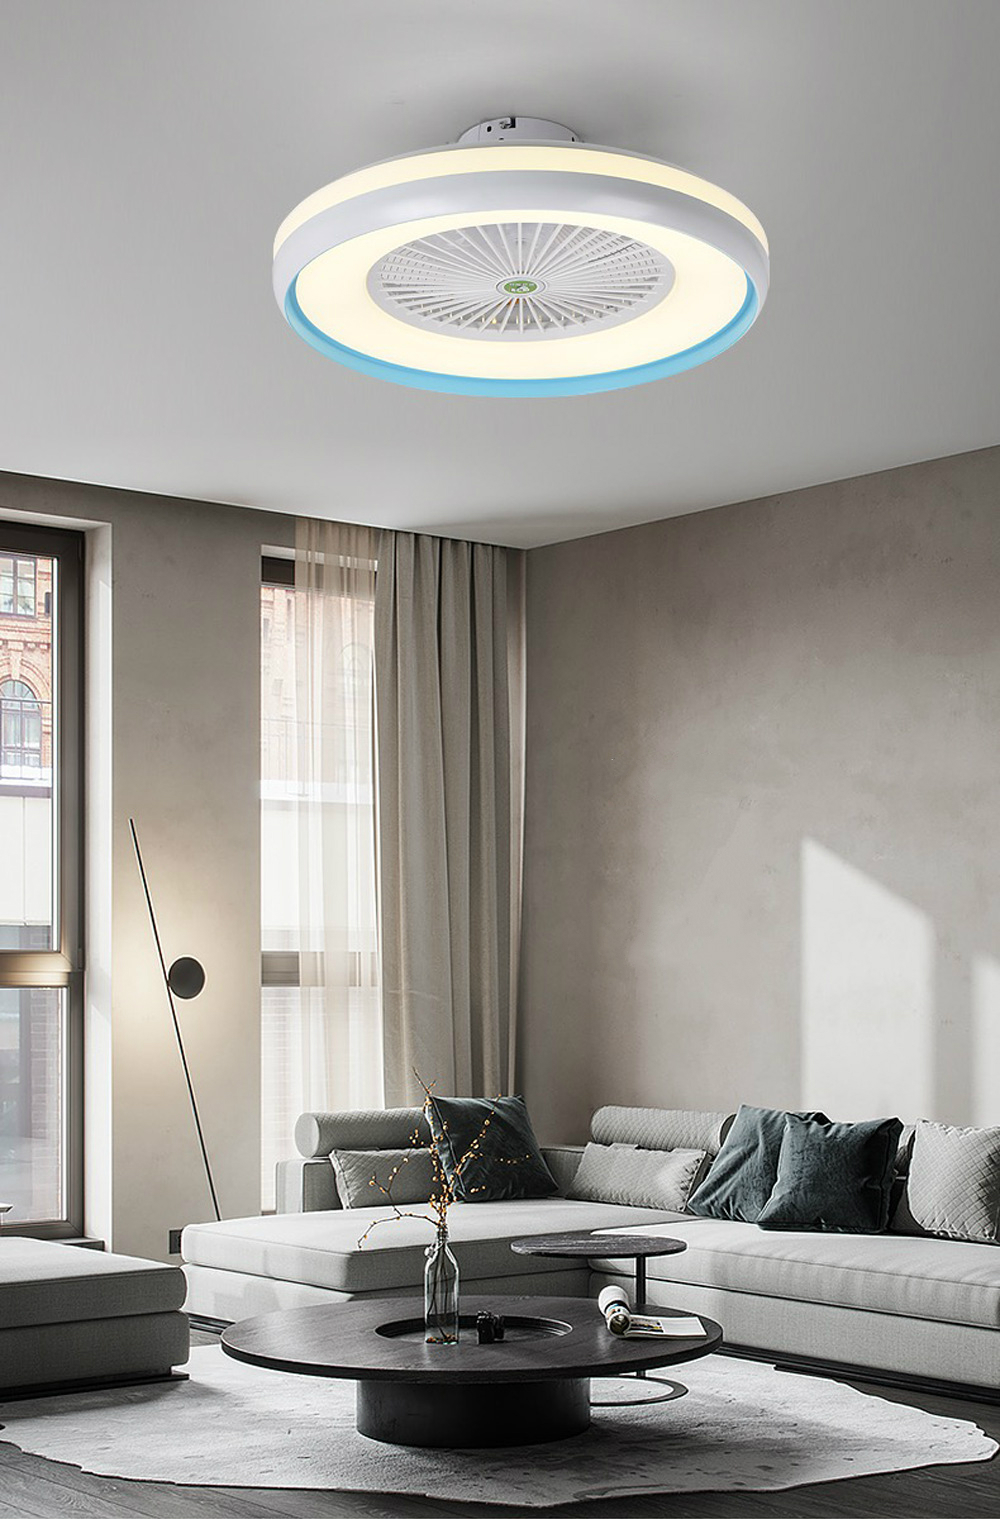 Ceiling-Fan-with-Lighting-LED-Light-3-Color-Temperature-Adjustable-Wind-Speed-Remote-Control-Without-1730818-1